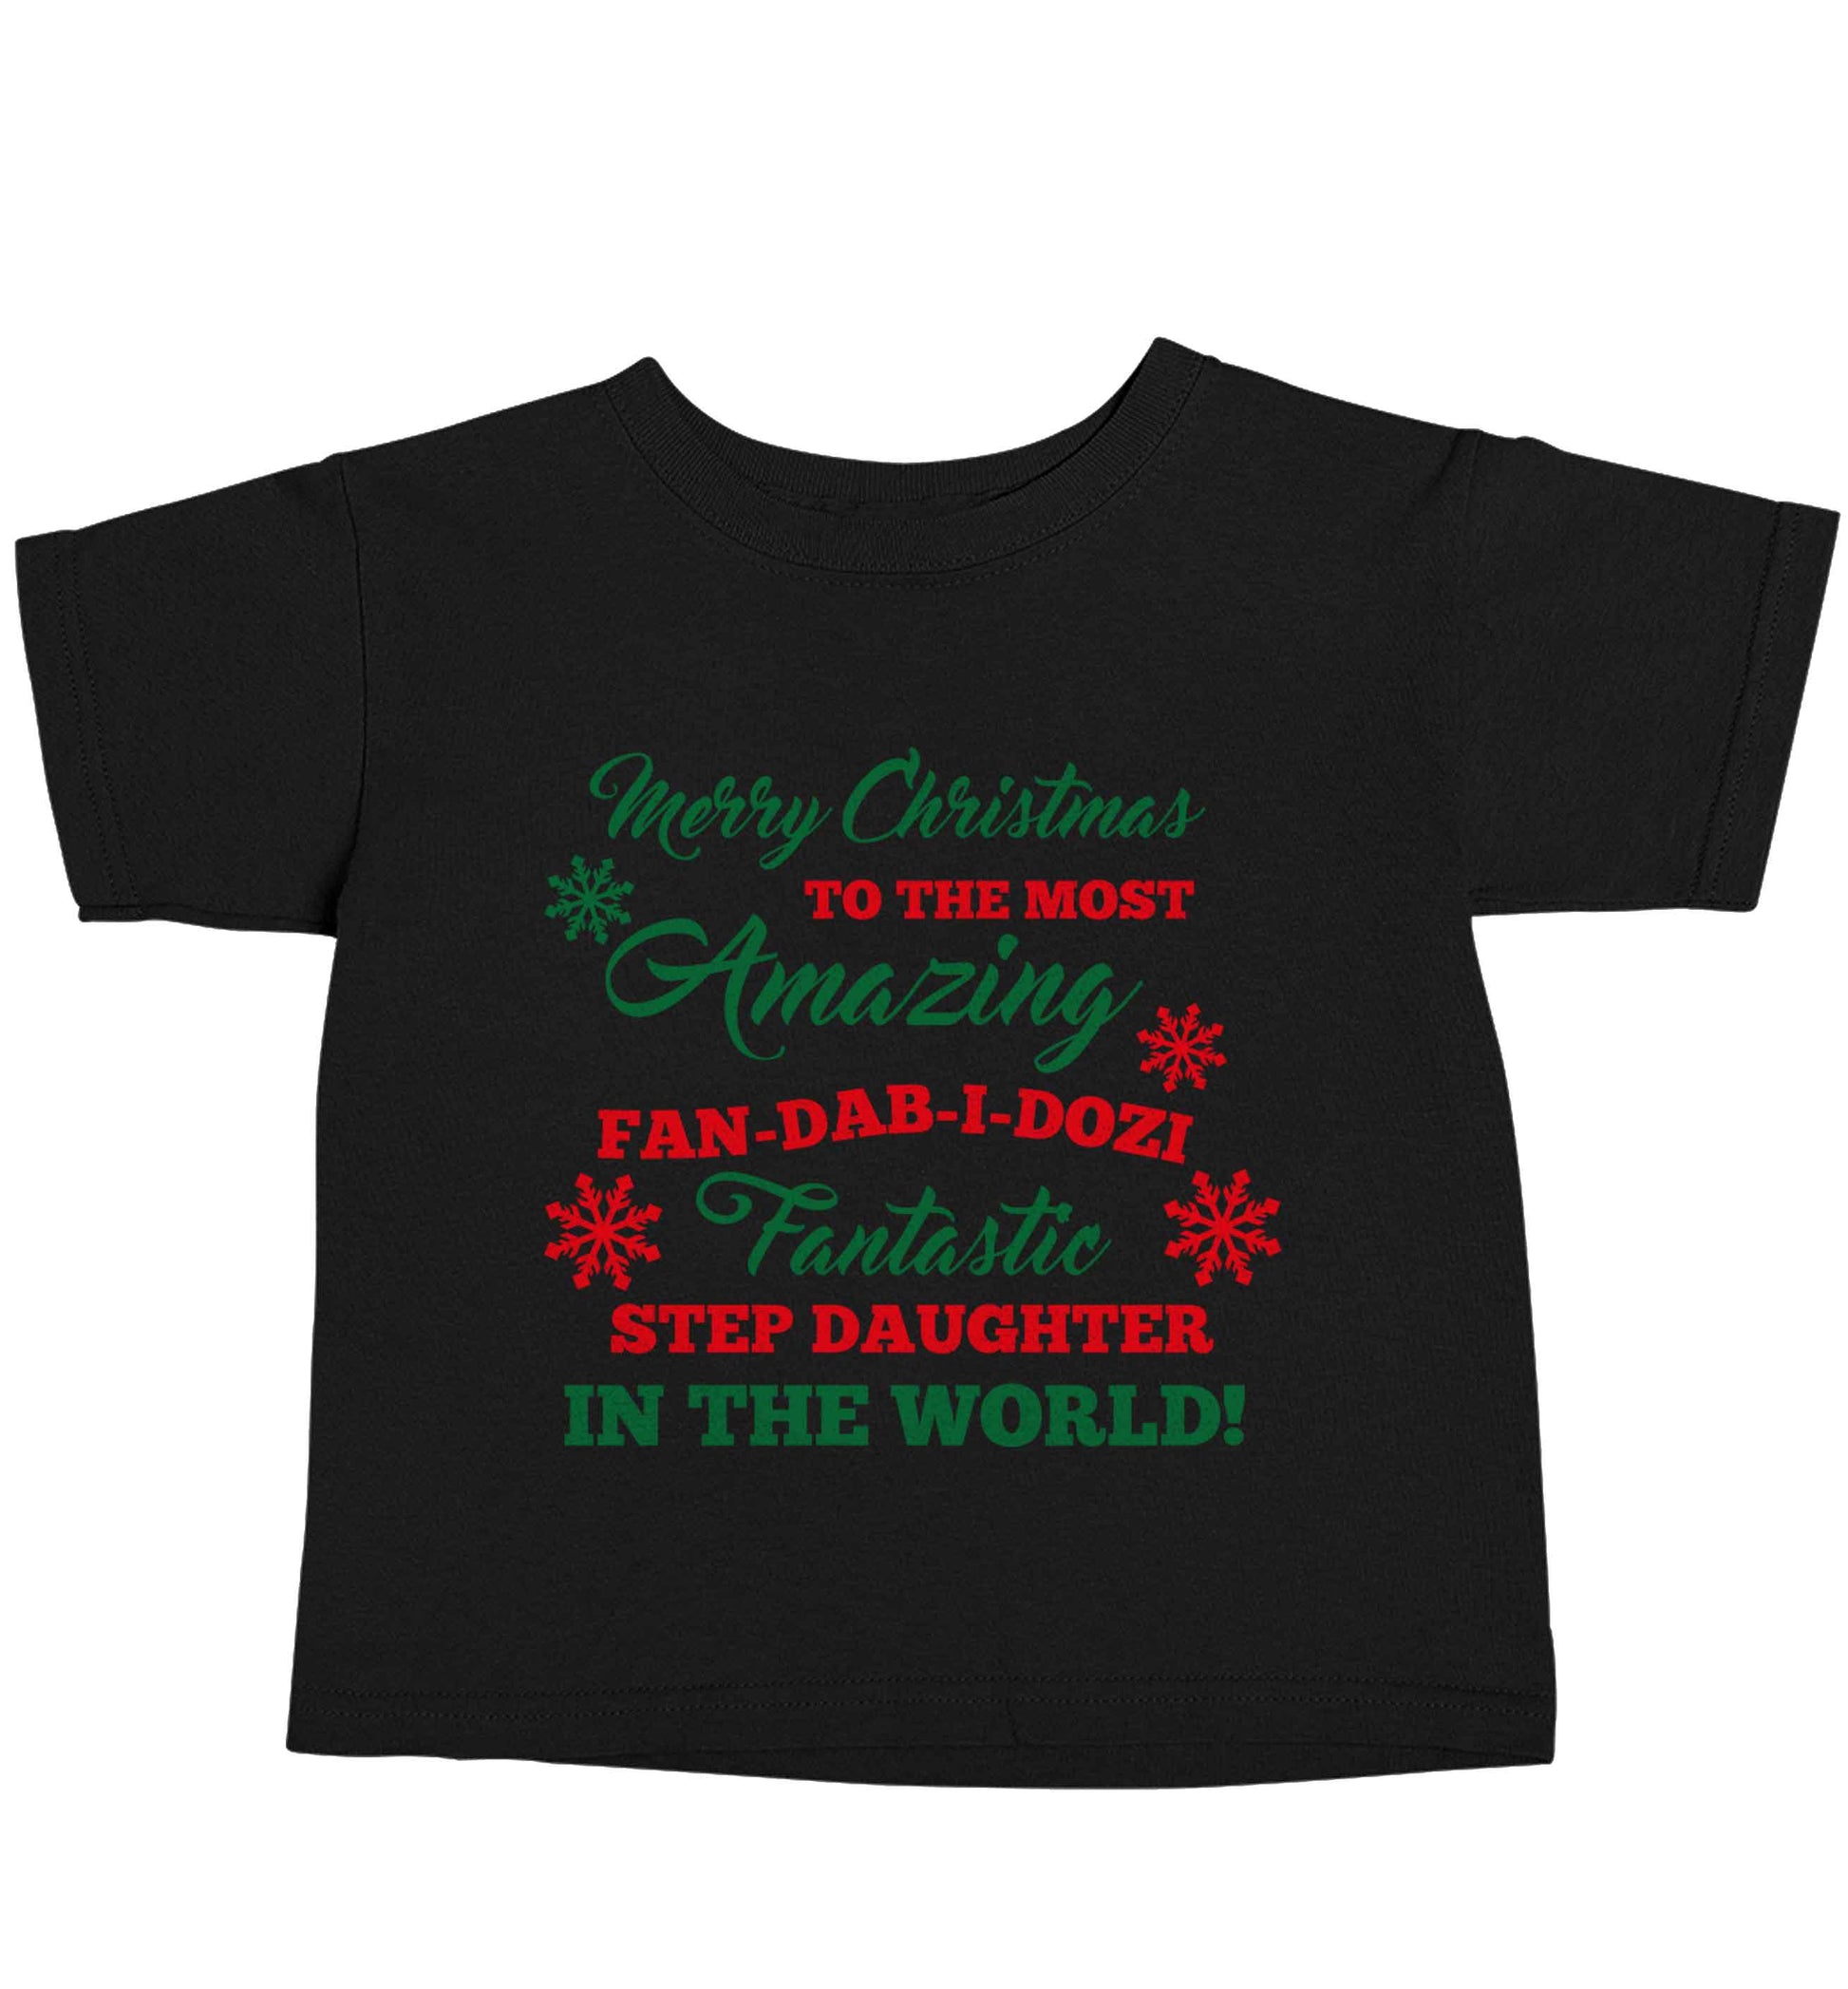 Merry Christmas to the most amazing fan-dab-i-dozi fantasic Step Daughter in the world Black baby toddler Tshirt 2 years